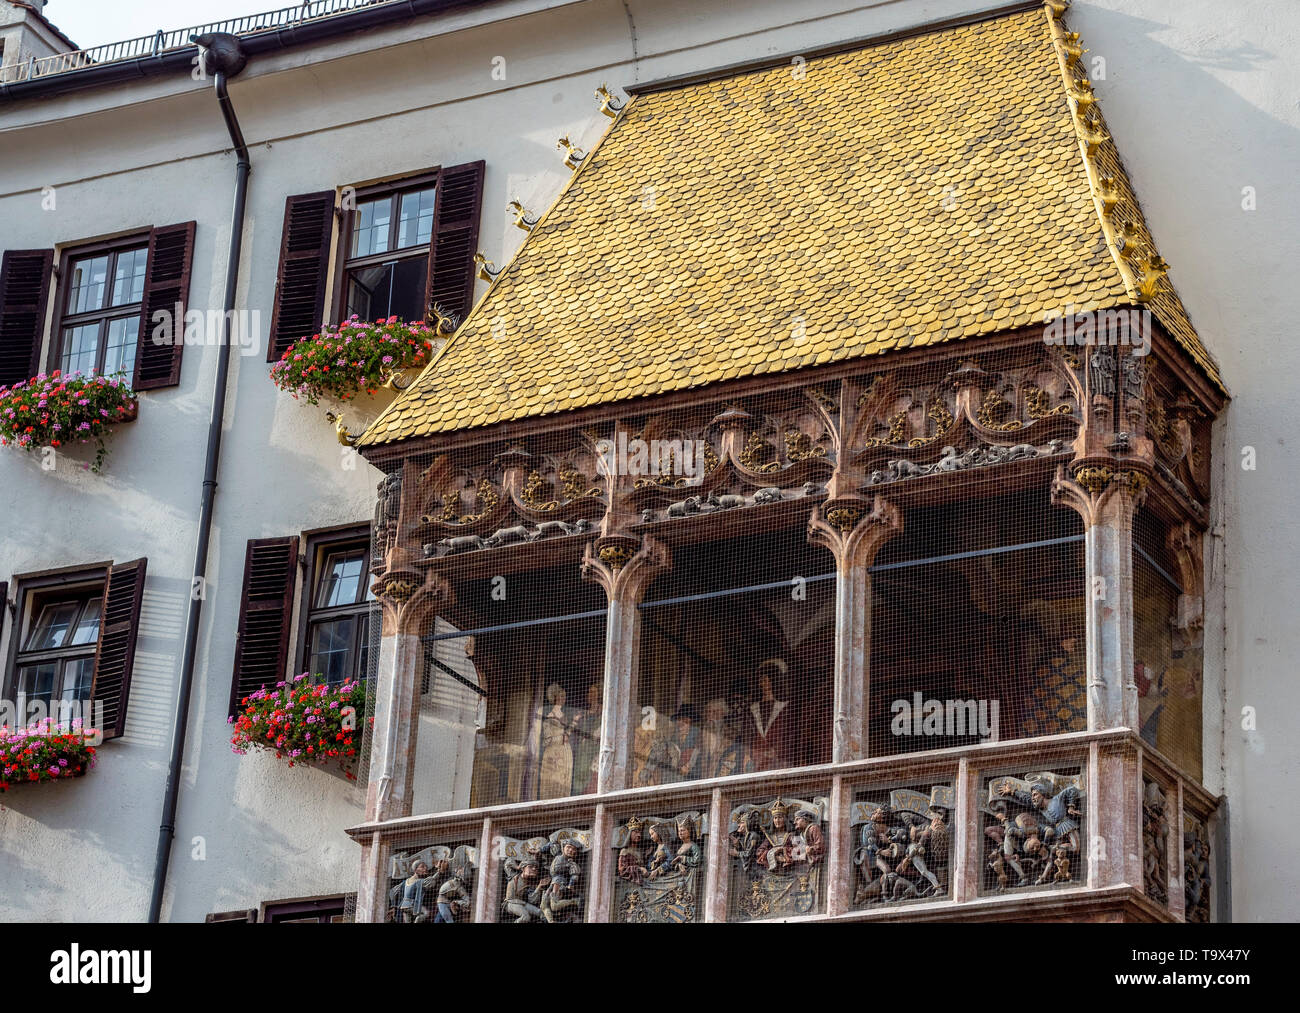 The golden Dachl, Late-Gothic splendour bay window from the 15th century in the Old Town of Innsbruck, Tyrol, Republic of Austria, Europe, Das Goldene Stock Photo